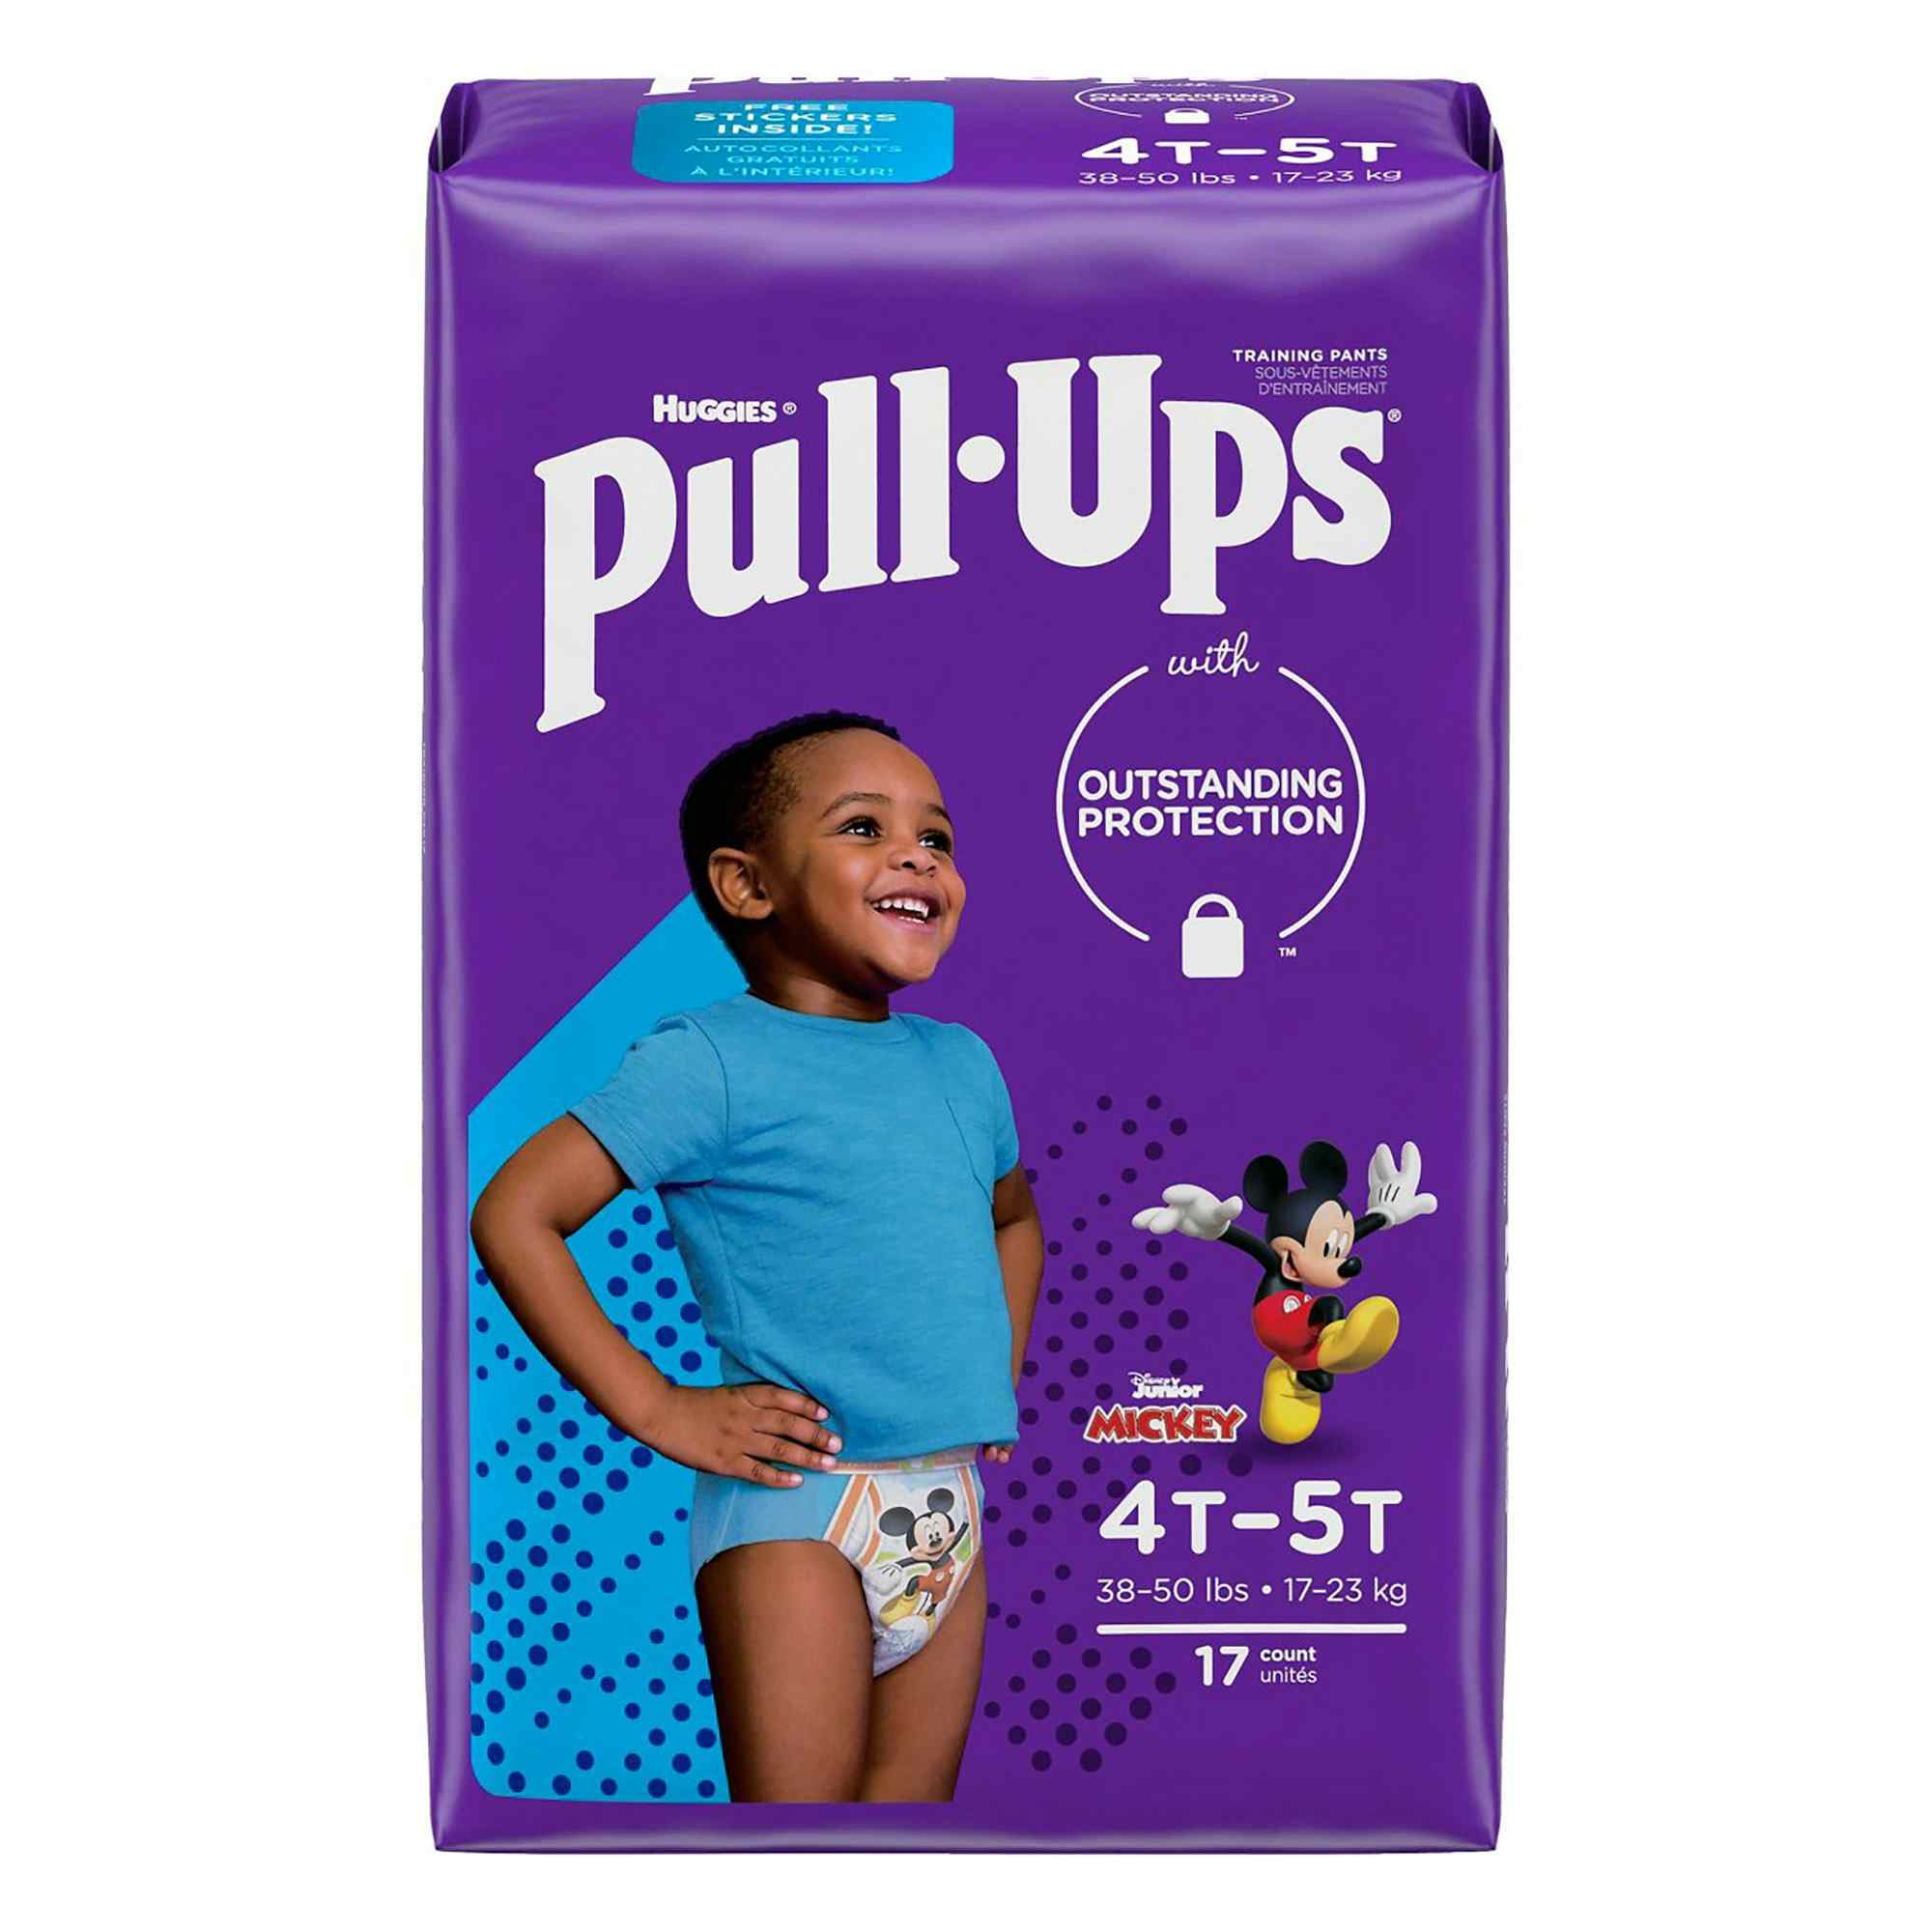 Huggies Boys Pull-Ups with Outstanding Protection, Moderate Absorbency, 51358, 4T-5T (38-50 lbs) - Case of 68 (4 Packs)